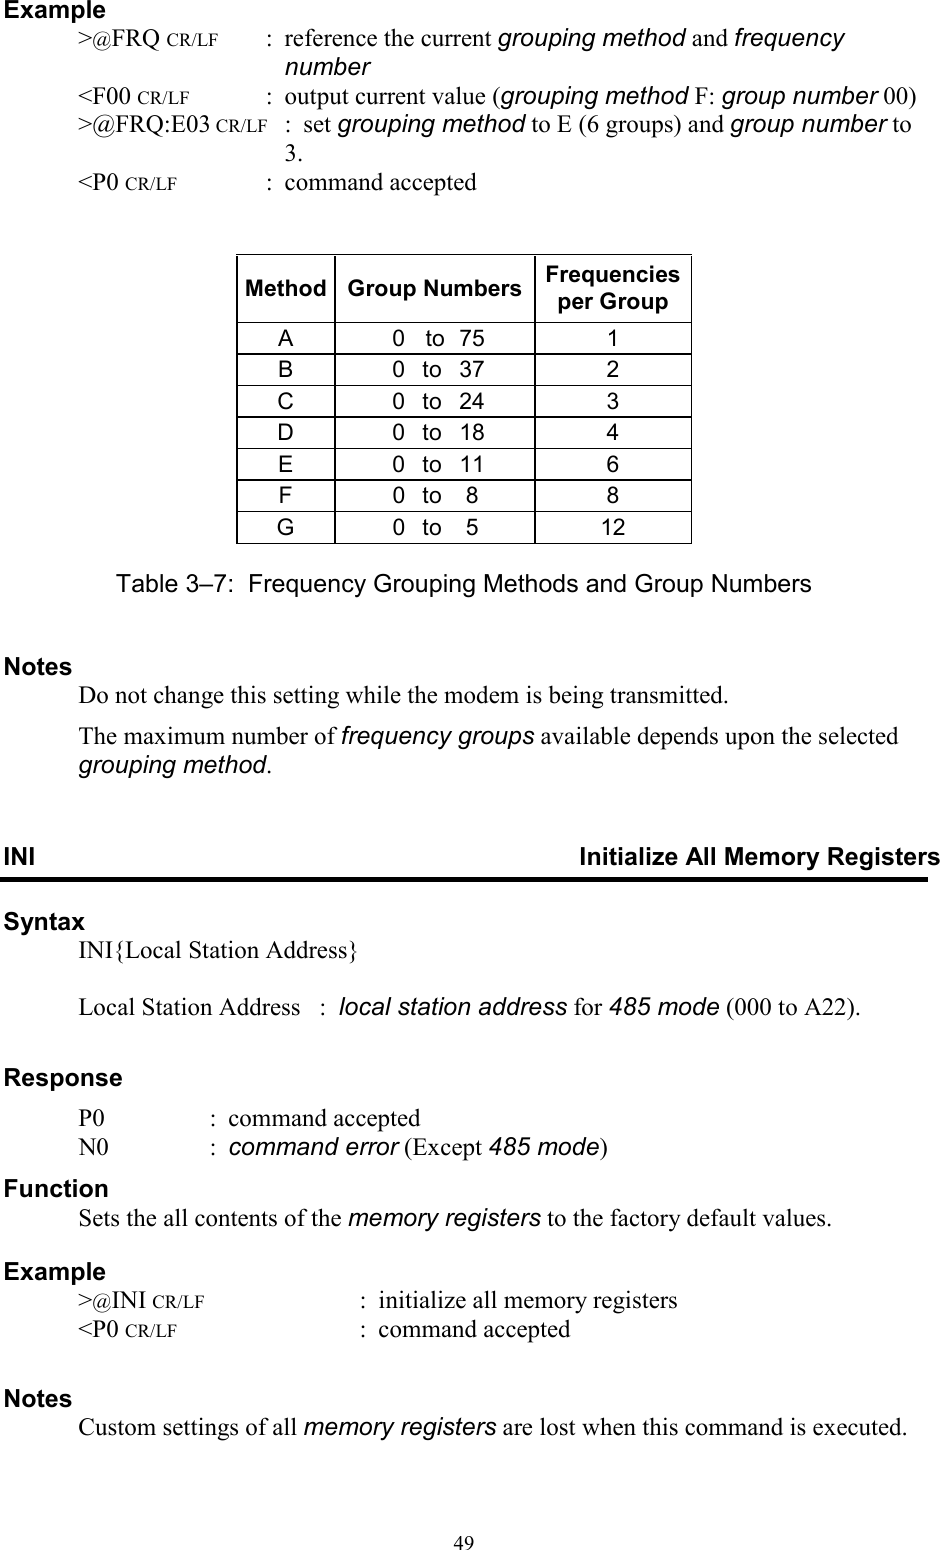  49Example   &gt;@FRQ CR/LF  :  reference the current grouping method and frequency number   &lt;F00 CR/LF  :  output current value (grouping method F: group number 00)   &gt;@FRQ:E03 CR/LF  :  set grouping method to E (6 groups) and group number to 3.   &lt;P0 CR/LF  :  command accepted   Method Group Numbers Frequencies per Group A  0  to  75   1 B  0 to 37   2 C  0 to 24   3 D  0 to 18   4 E  0 to 11   6 F  0 to 8   8 G  0 to 5   12 Table 3–7:  Frequency Grouping Methods and Group Numbers Notes   Do not change this setting while the modem is being transmitted.   The maximum number of frequency groups available depends upon the selected grouping method. INI  Initialize All Memory Registers Syntax   INI{Local Station Address}      Local Station Address   :  local station address for 485 mode (000 to A22).  Response   P0  :  command accepted   N0  :  command error (Except 485 mode) Function   Sets the all contents of the memory registers to the factory default values. Example   &gt;@INI CR/LF  :  initialize all memory registers   &lt;P0 CR/LF  :  command accepted  Notes   Custom settings of all memory registers are lost when this command is executed. 